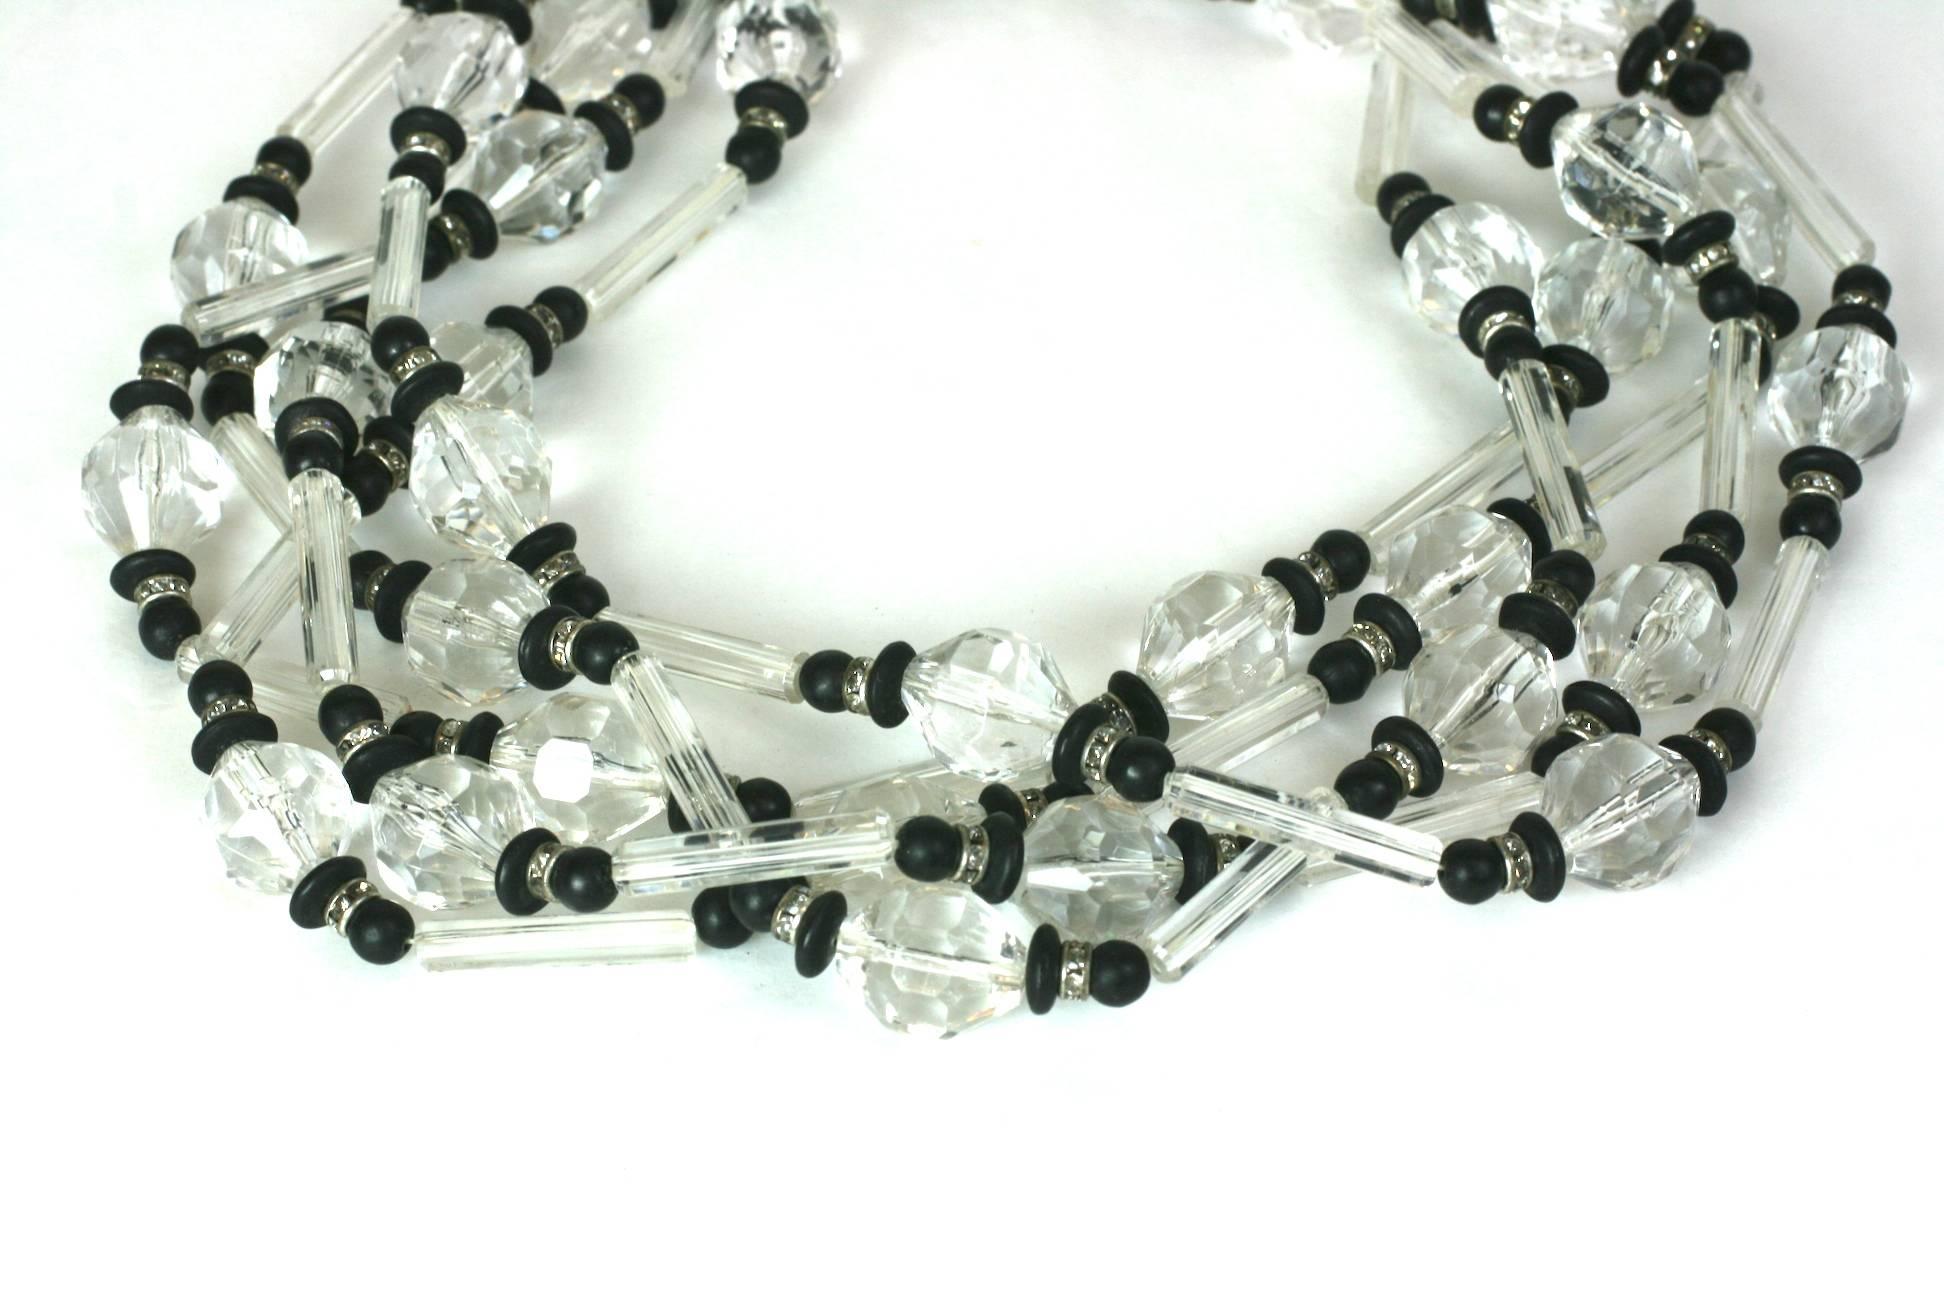 Lucite and Pave Rondel Bead Necklace from the 1960's. Long barrel shaped lucite beads are mixed with black lucite and grey pave crystal rondel spacers for a more 